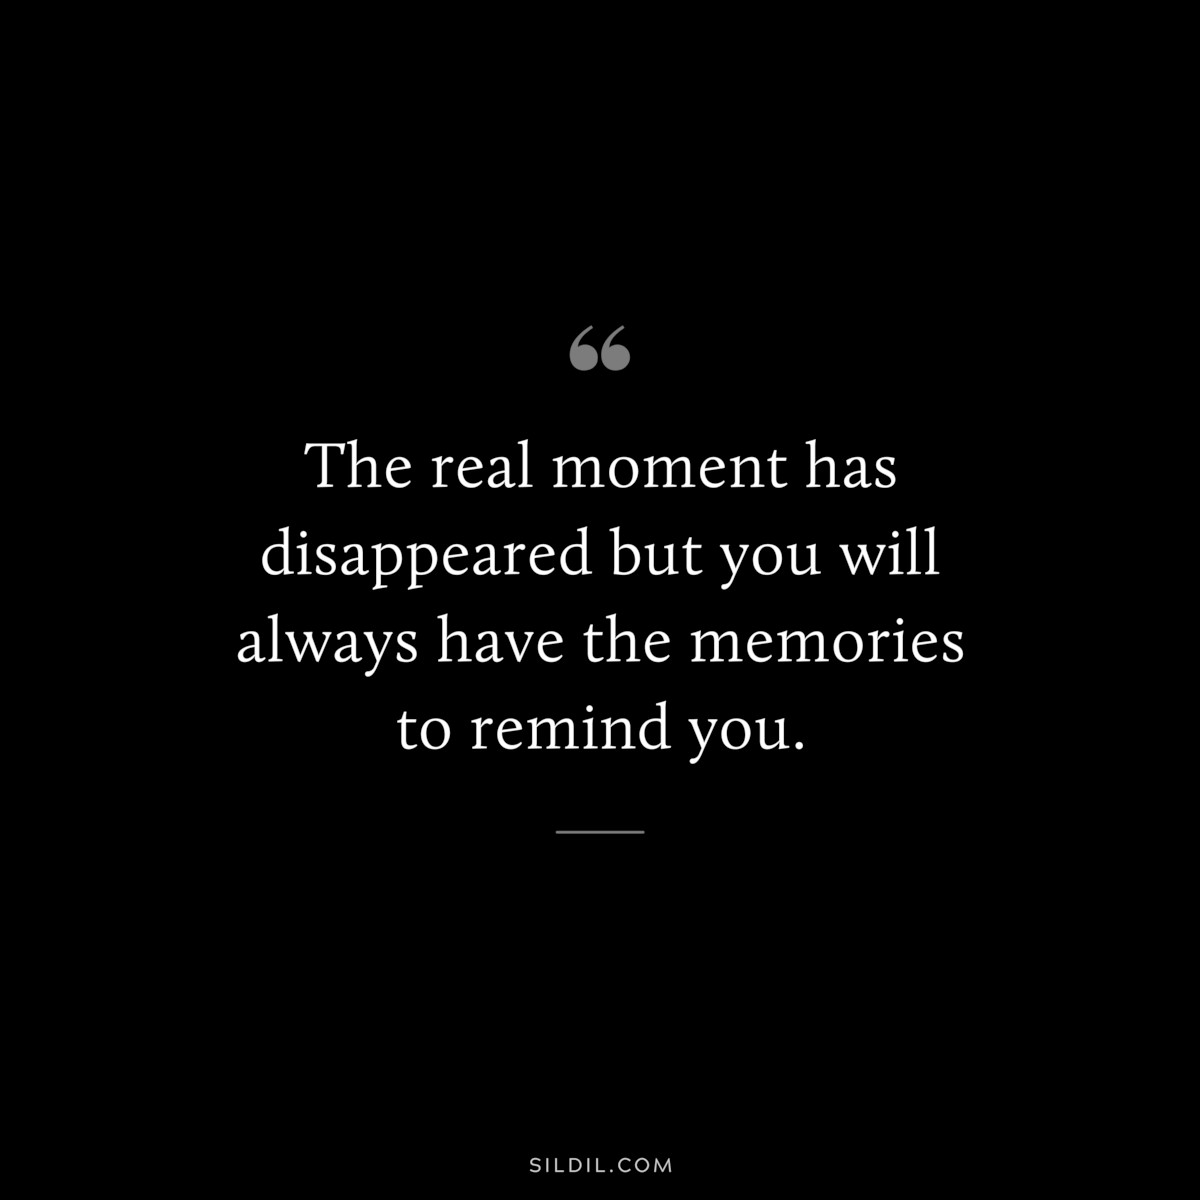 The real moment has disappeared but you will always have the memories to remind you.